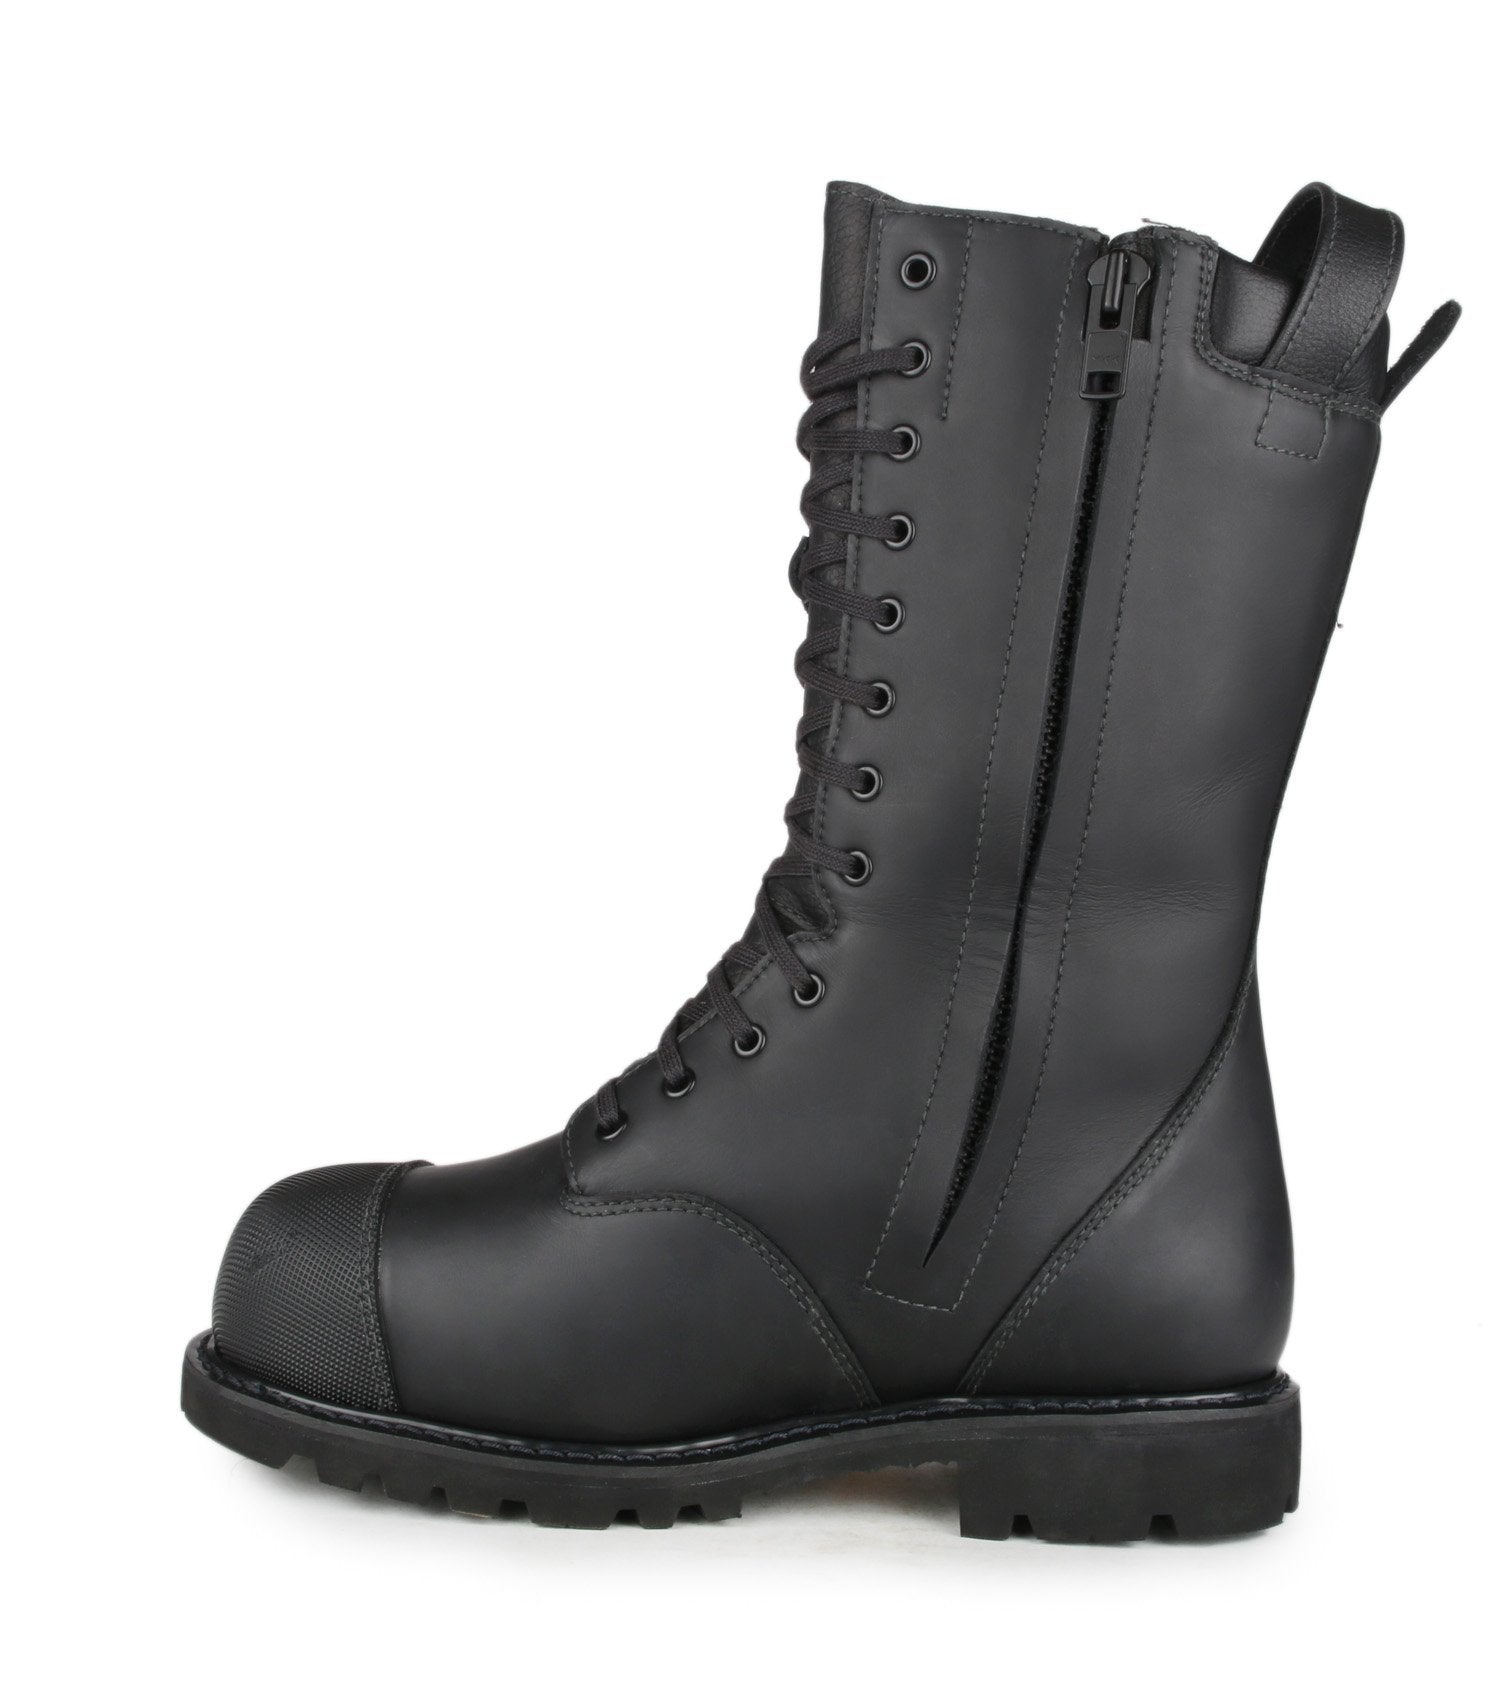 leather fire boots clearance